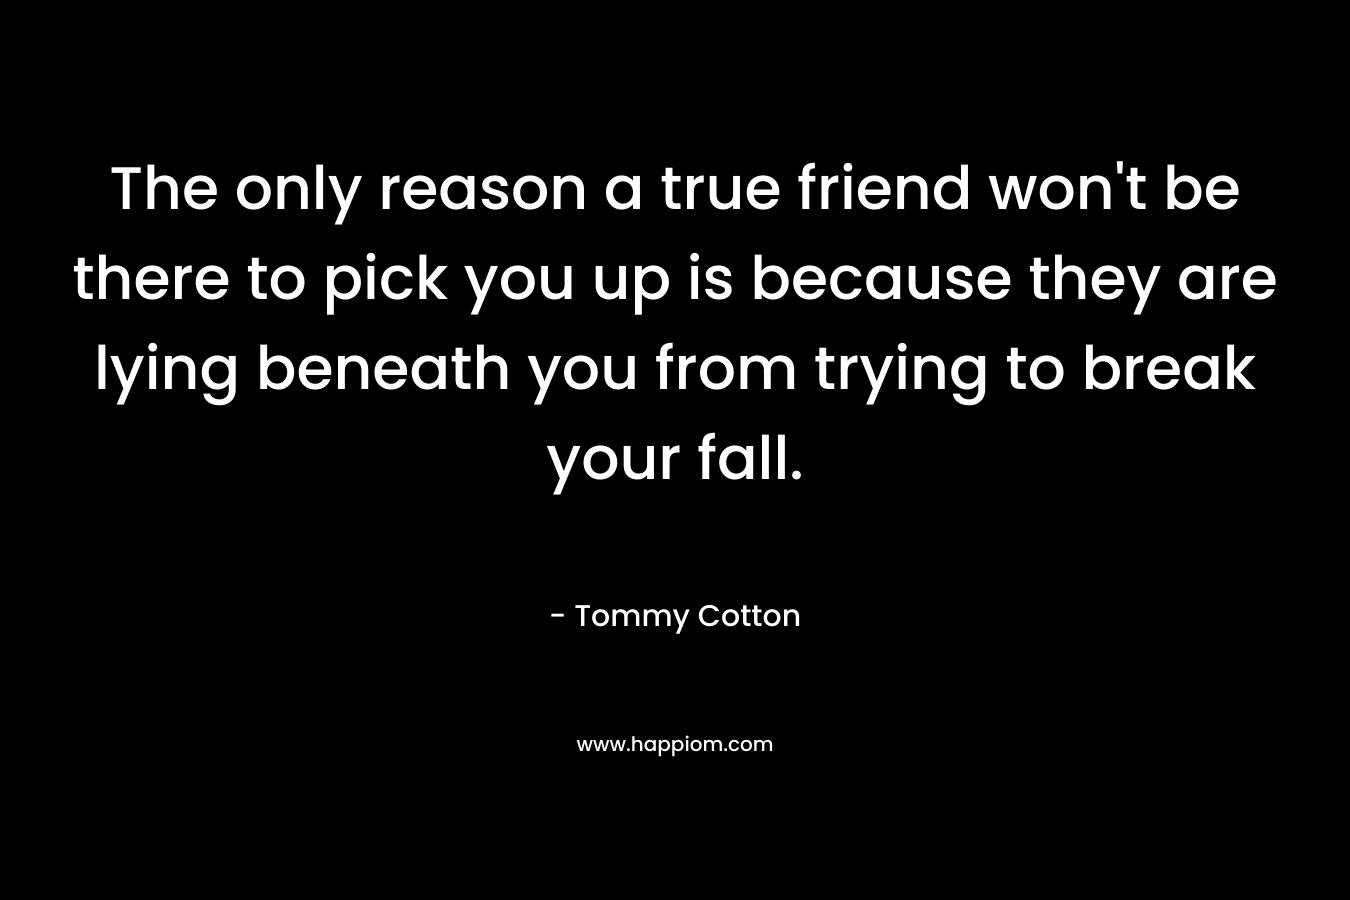 The only reason a true friend won't be there to pick you up is because they are lying beneath you from trying to break your fall.